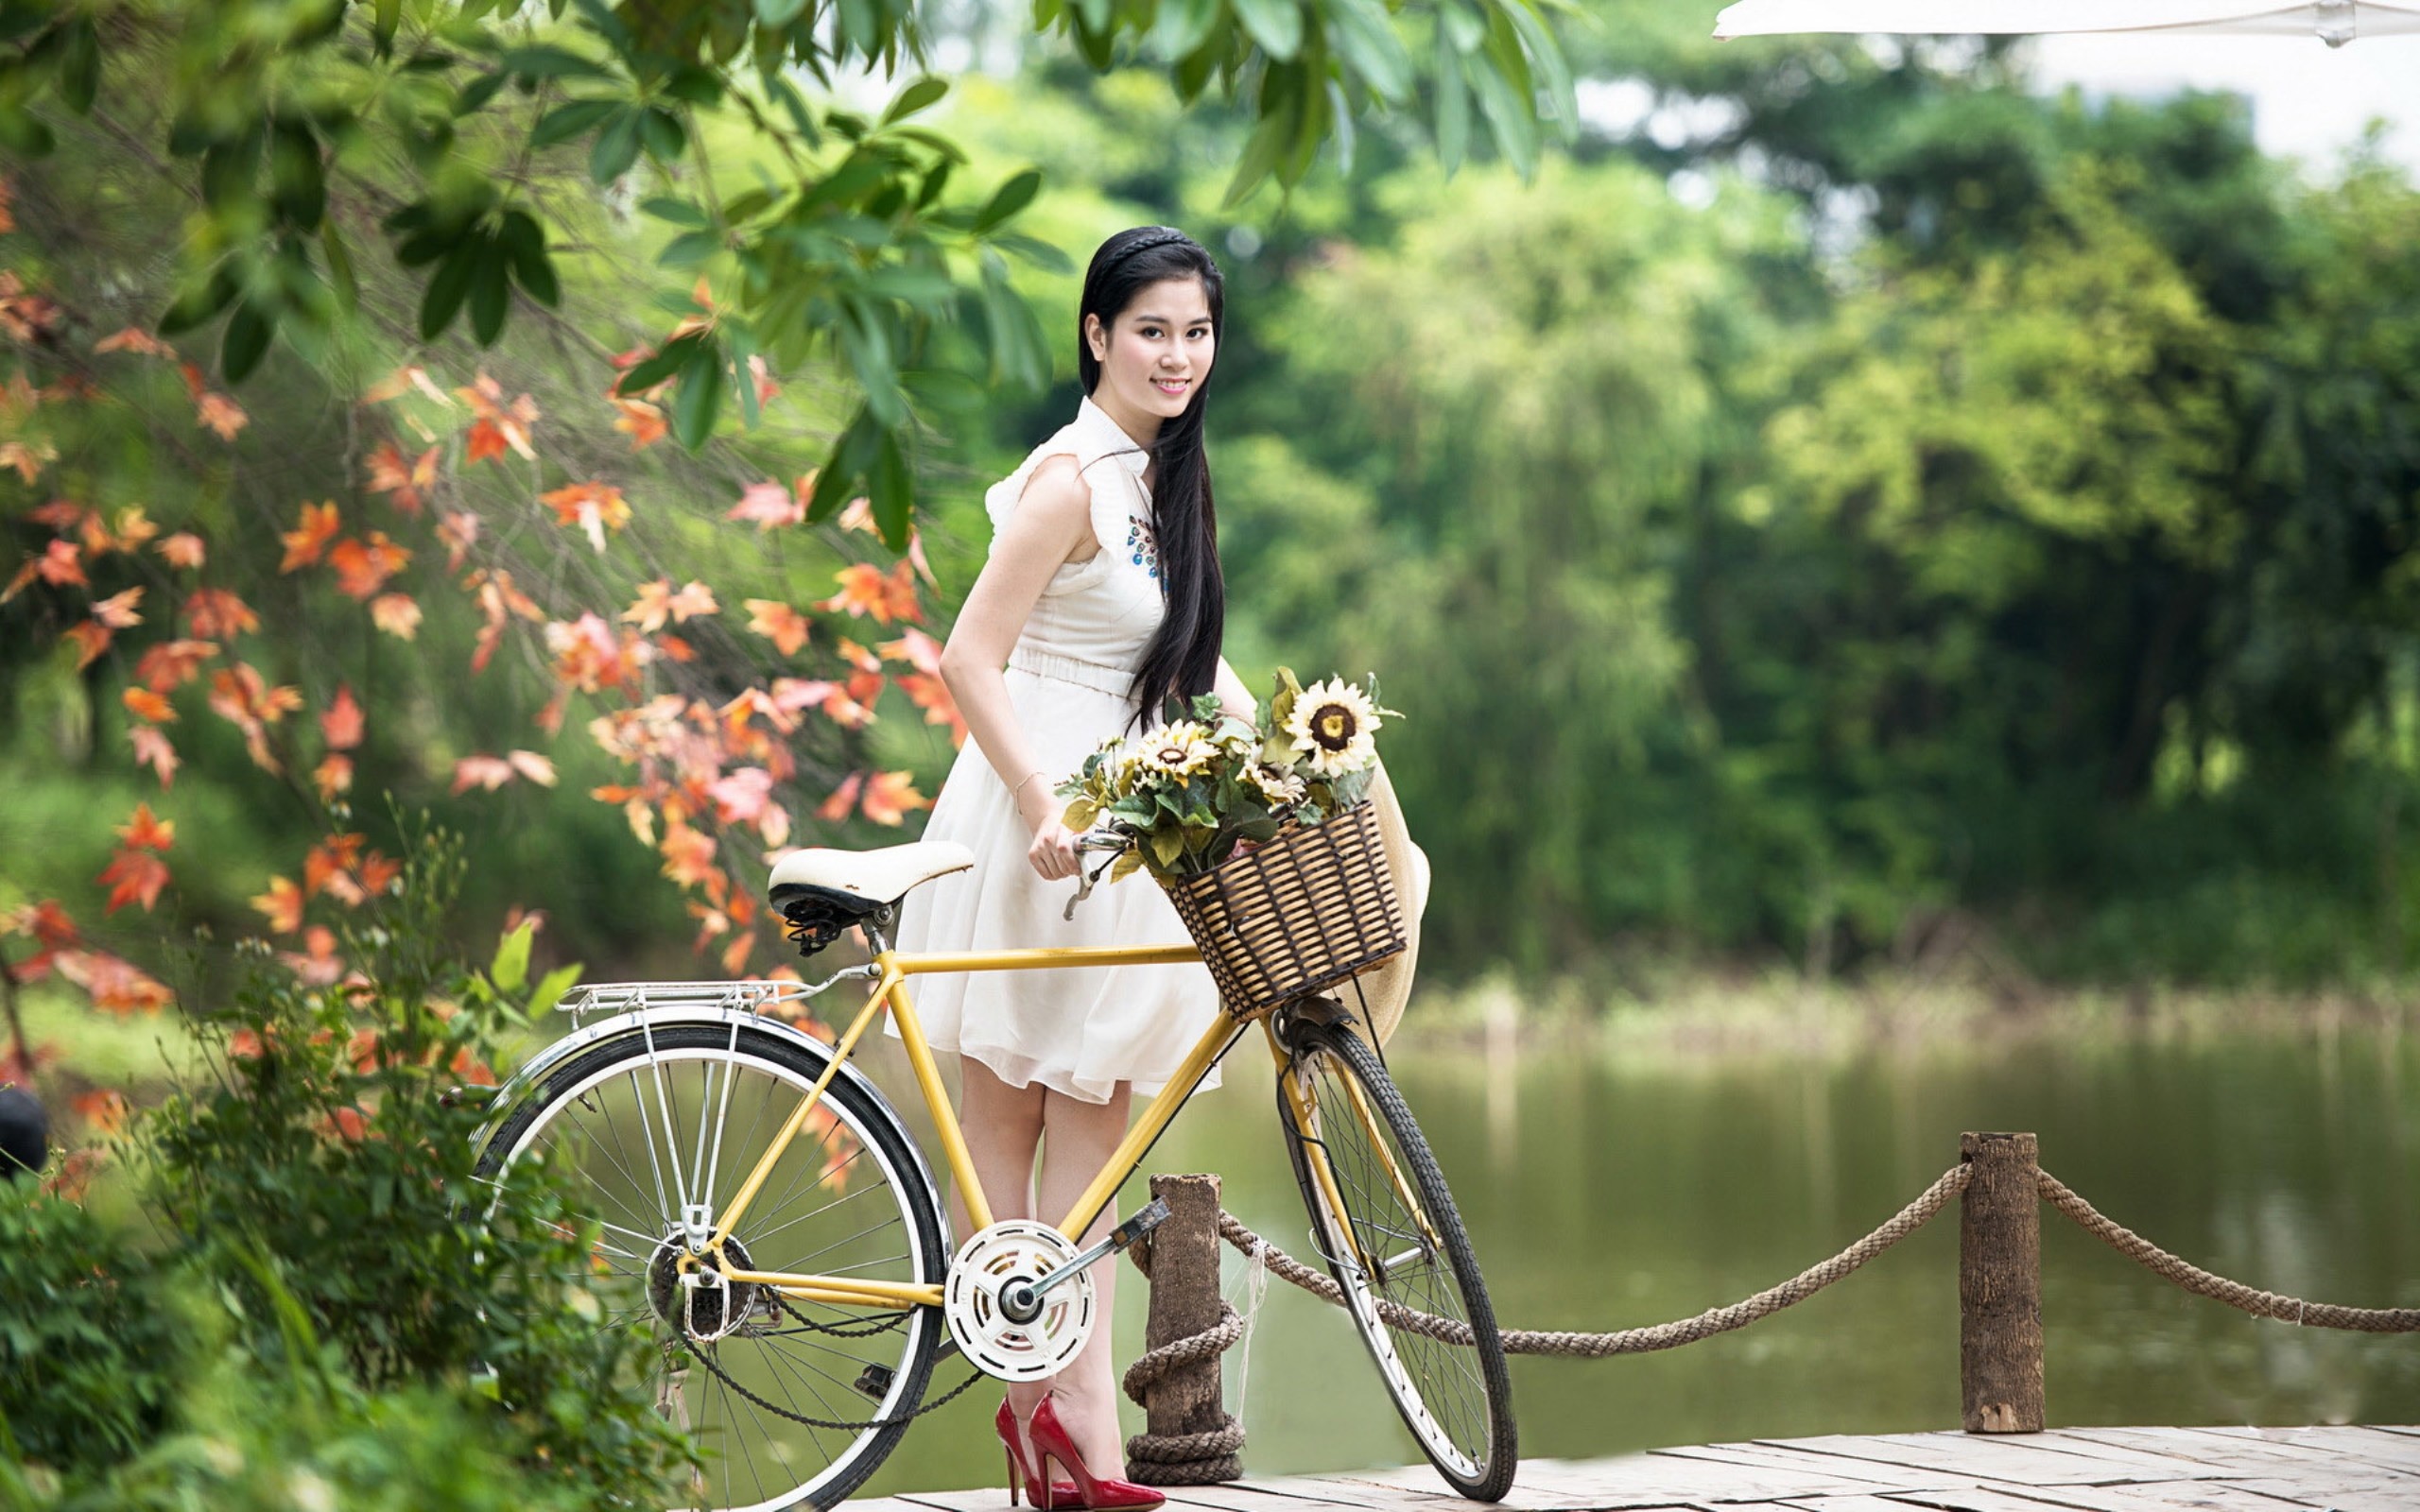 Nude asian model on a bicycle